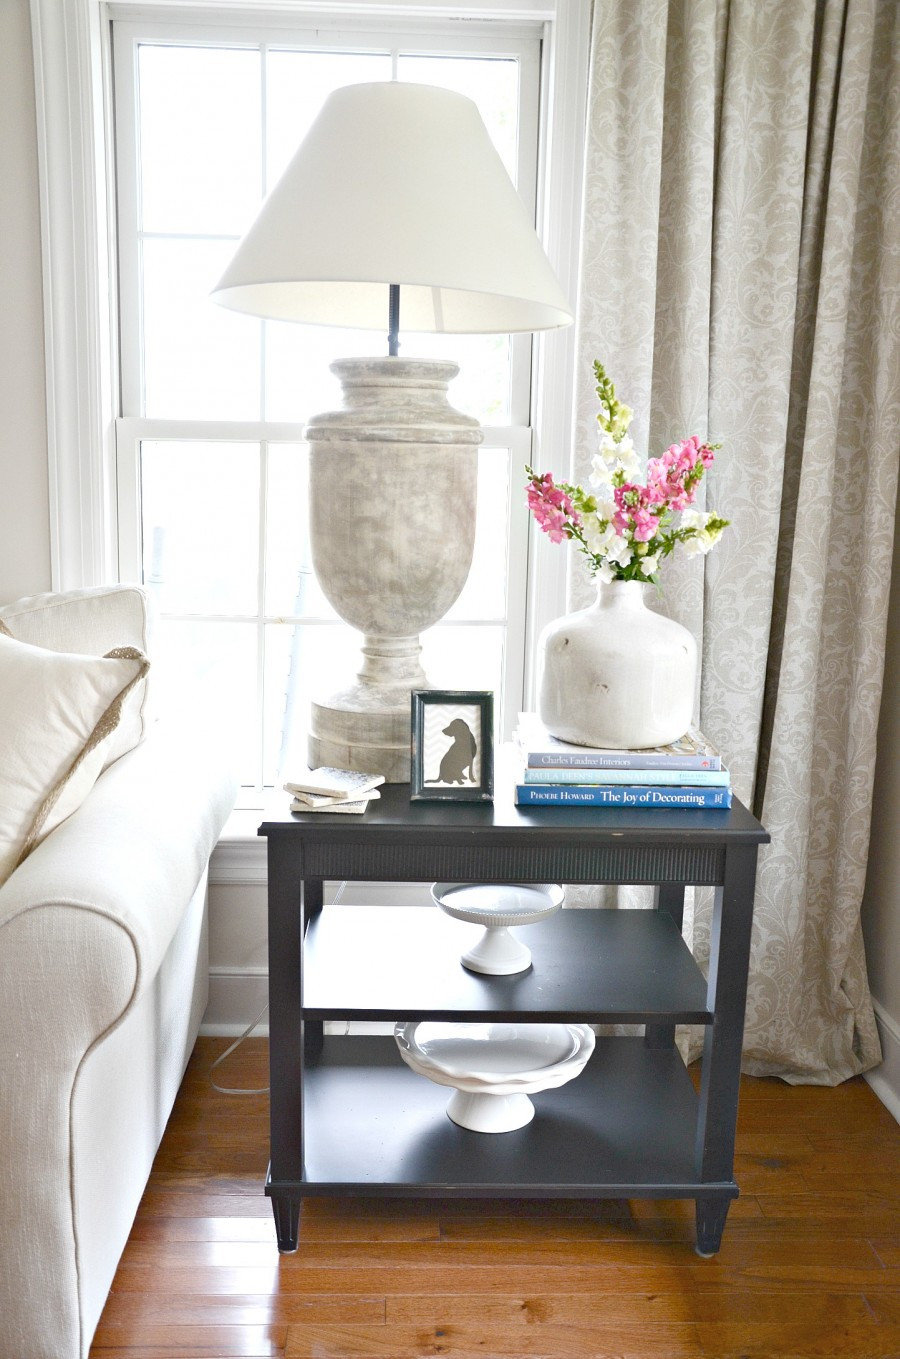 Living Room End Table Decor
 HOW TO STYLE AN END TABLE LIKE A PRO StoneGable